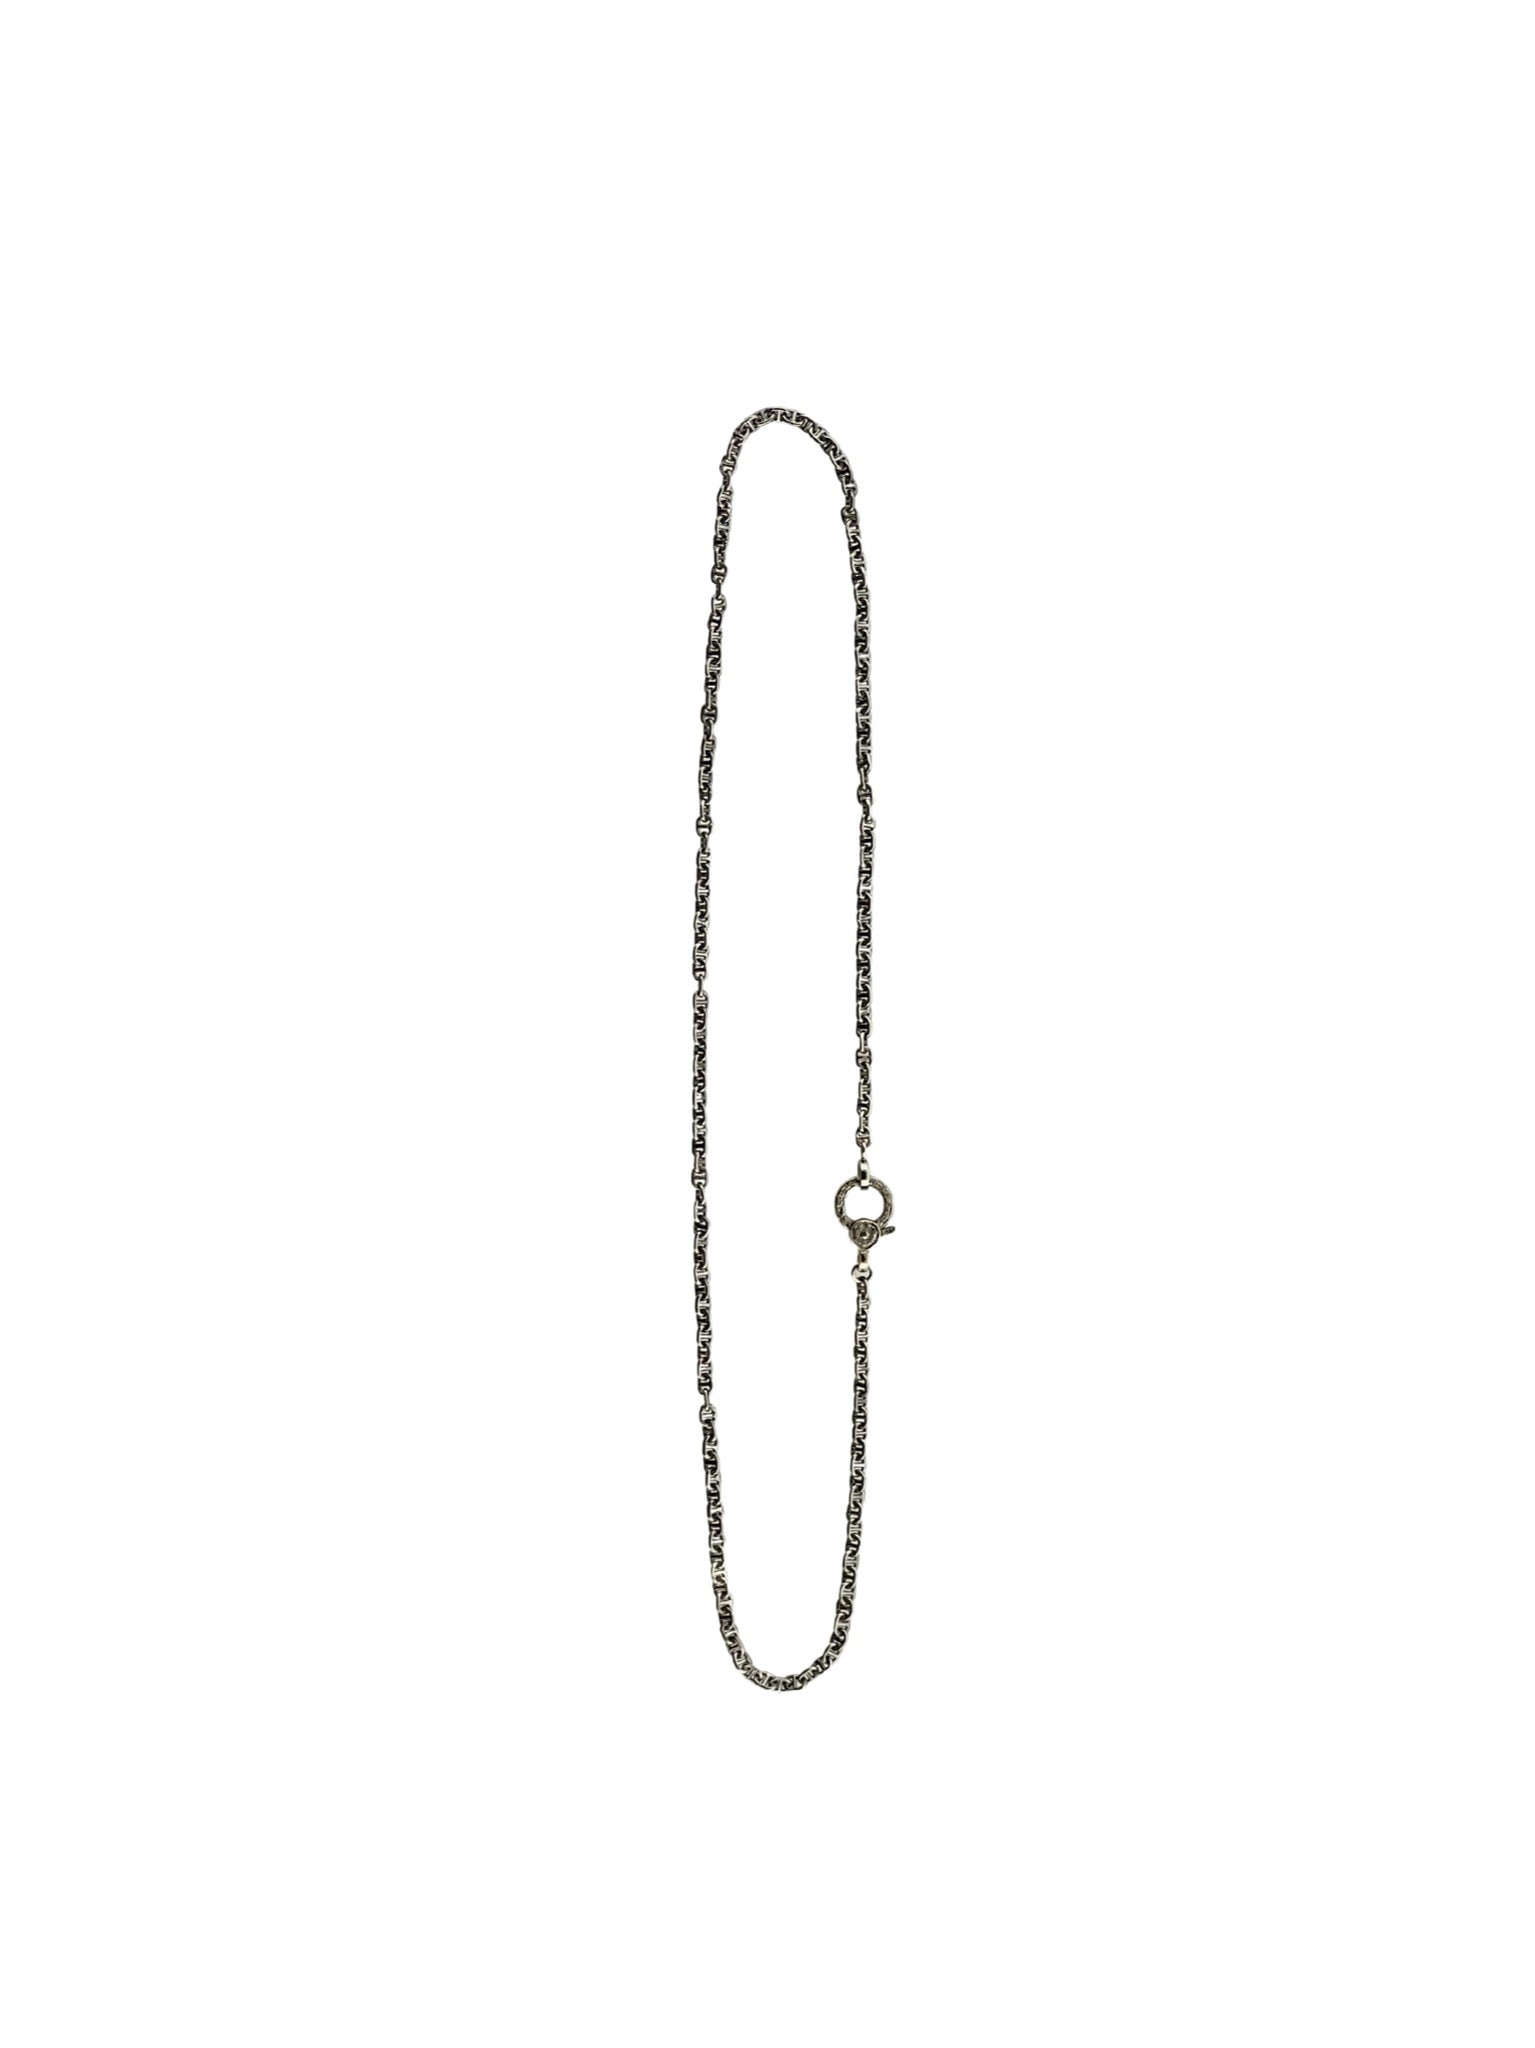 Mini Mariner Sterling Silver Chain with Pave Diamond Circle Clasp- 17"